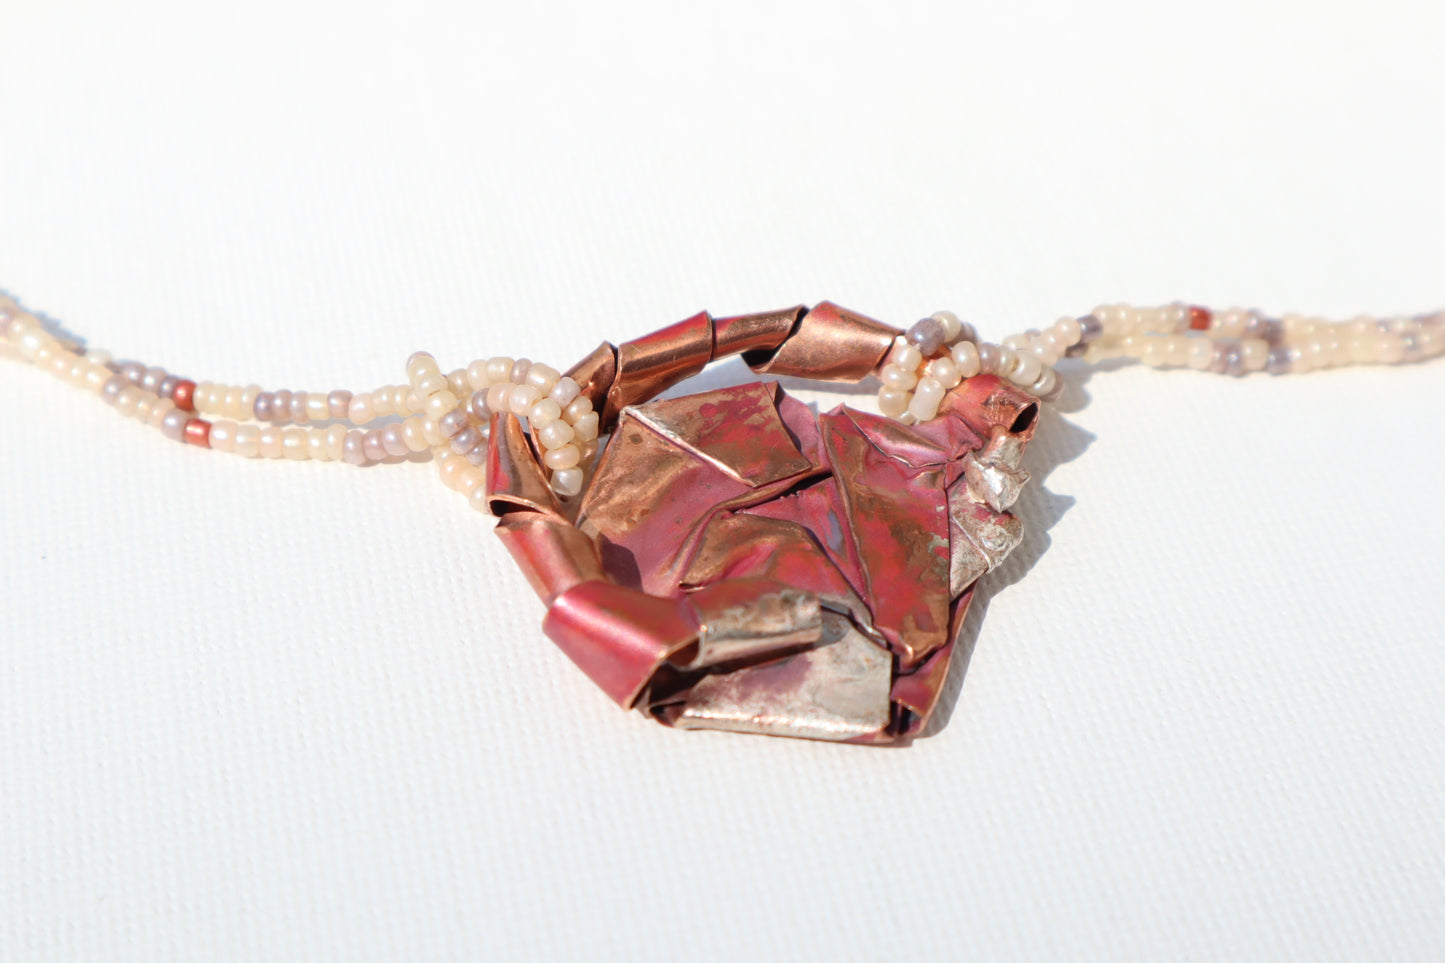 010 Copper and Ribbon Necklace